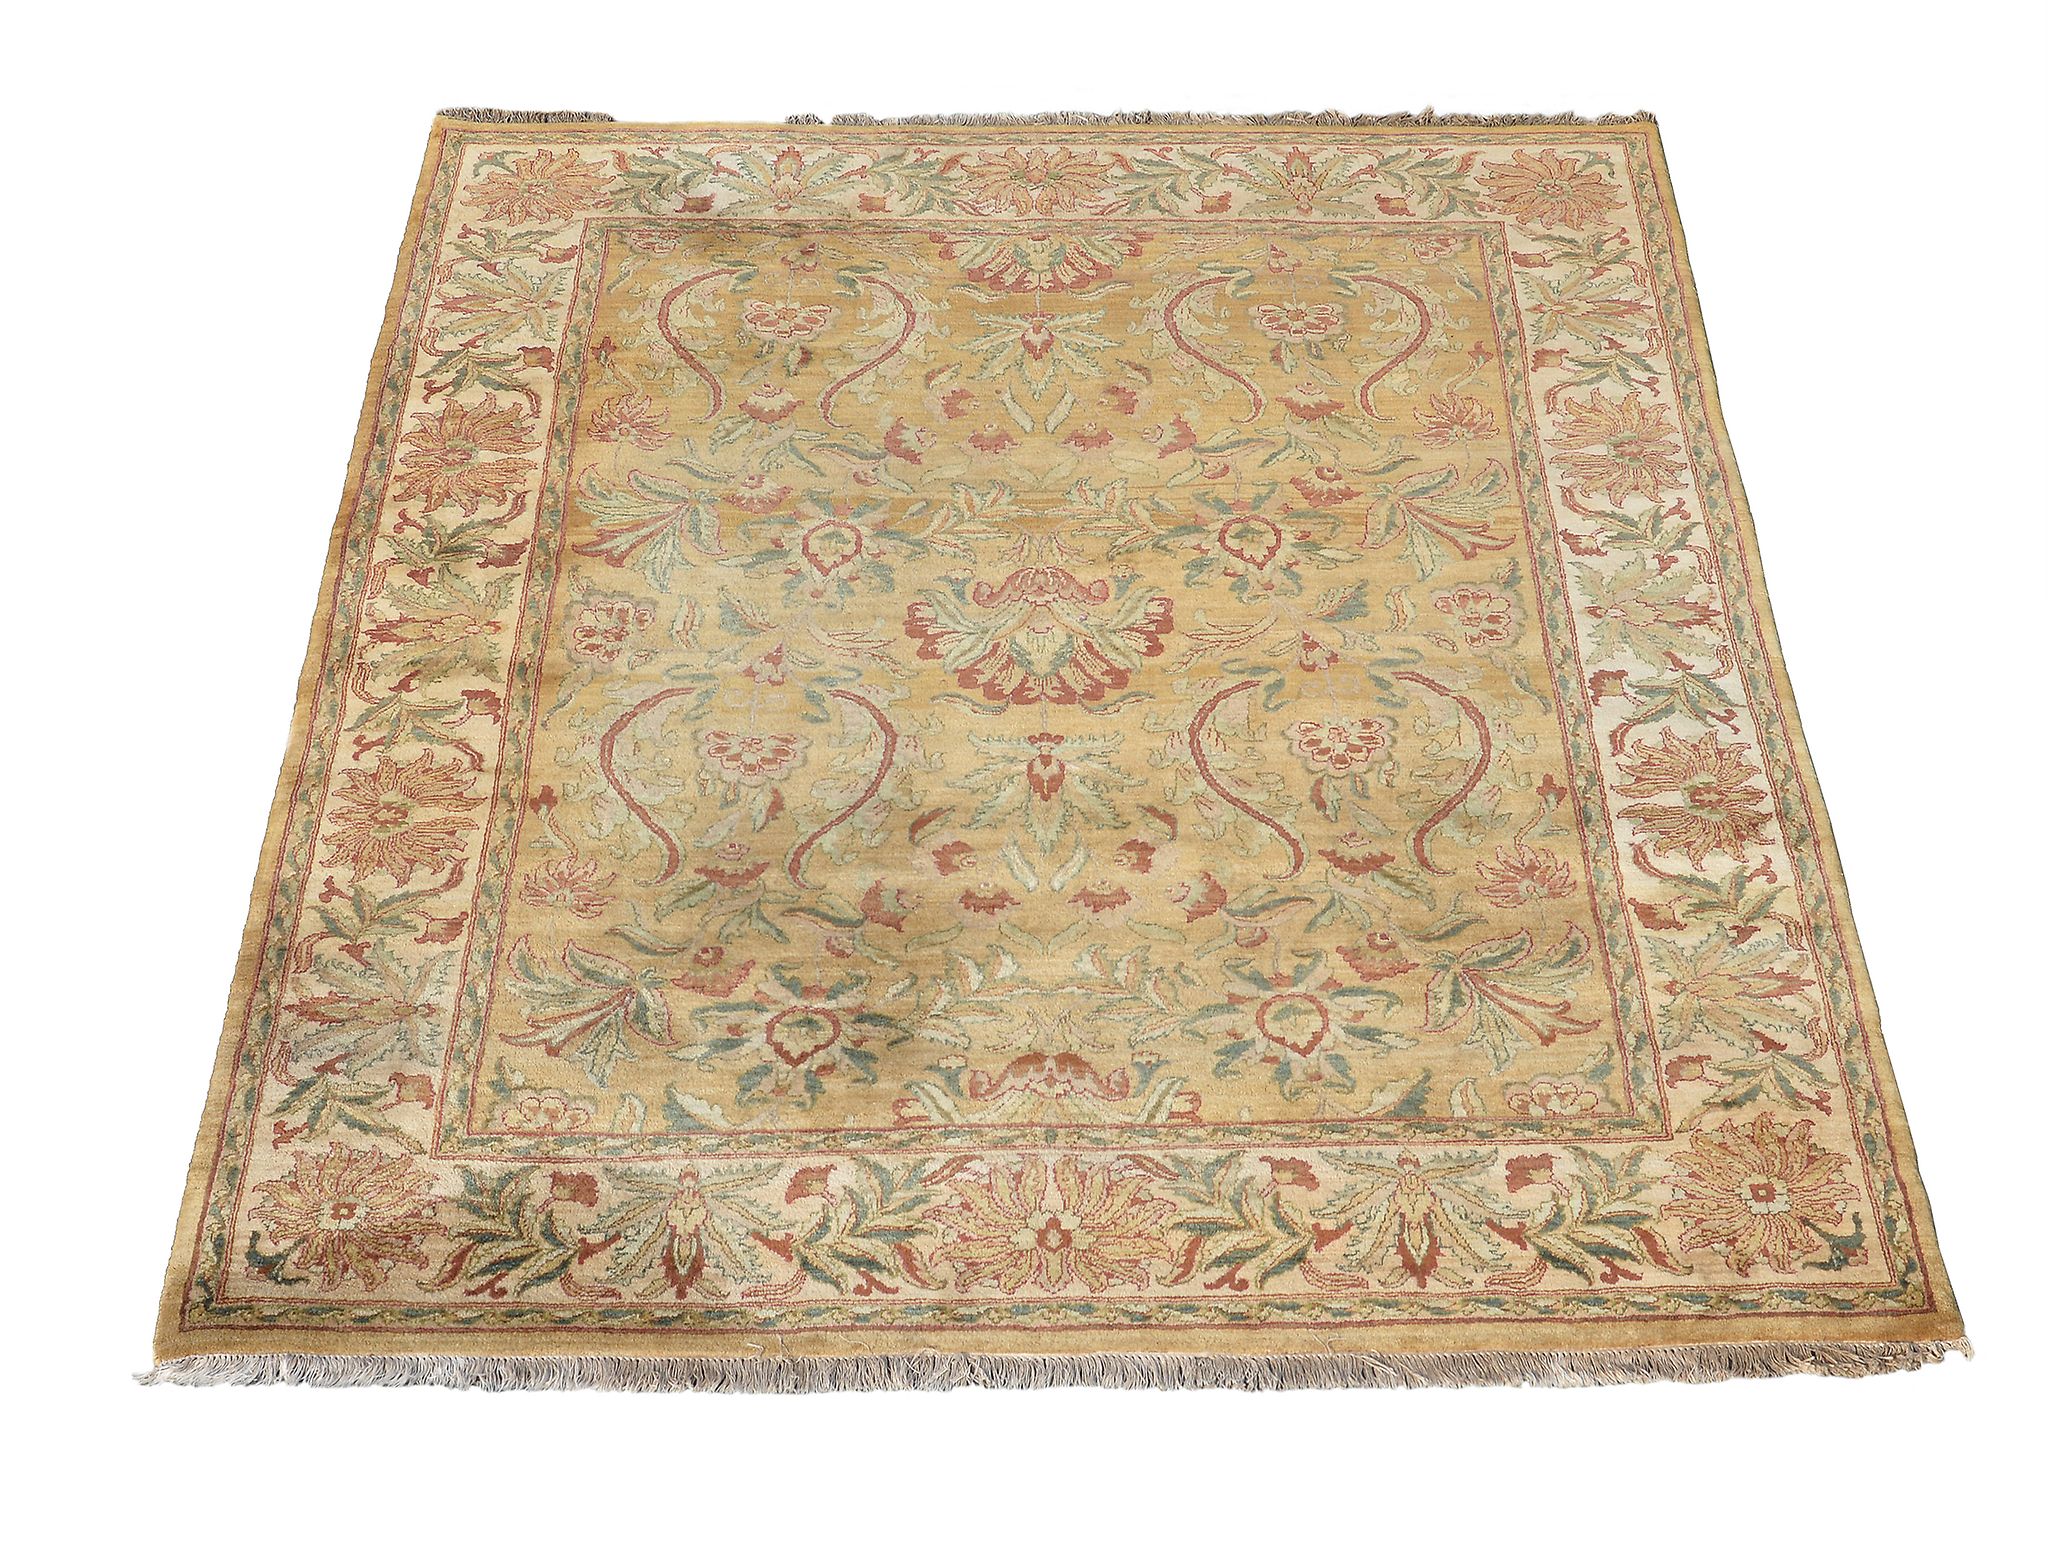 A woven carpet in Agra style , approximately 365cm x 270cm